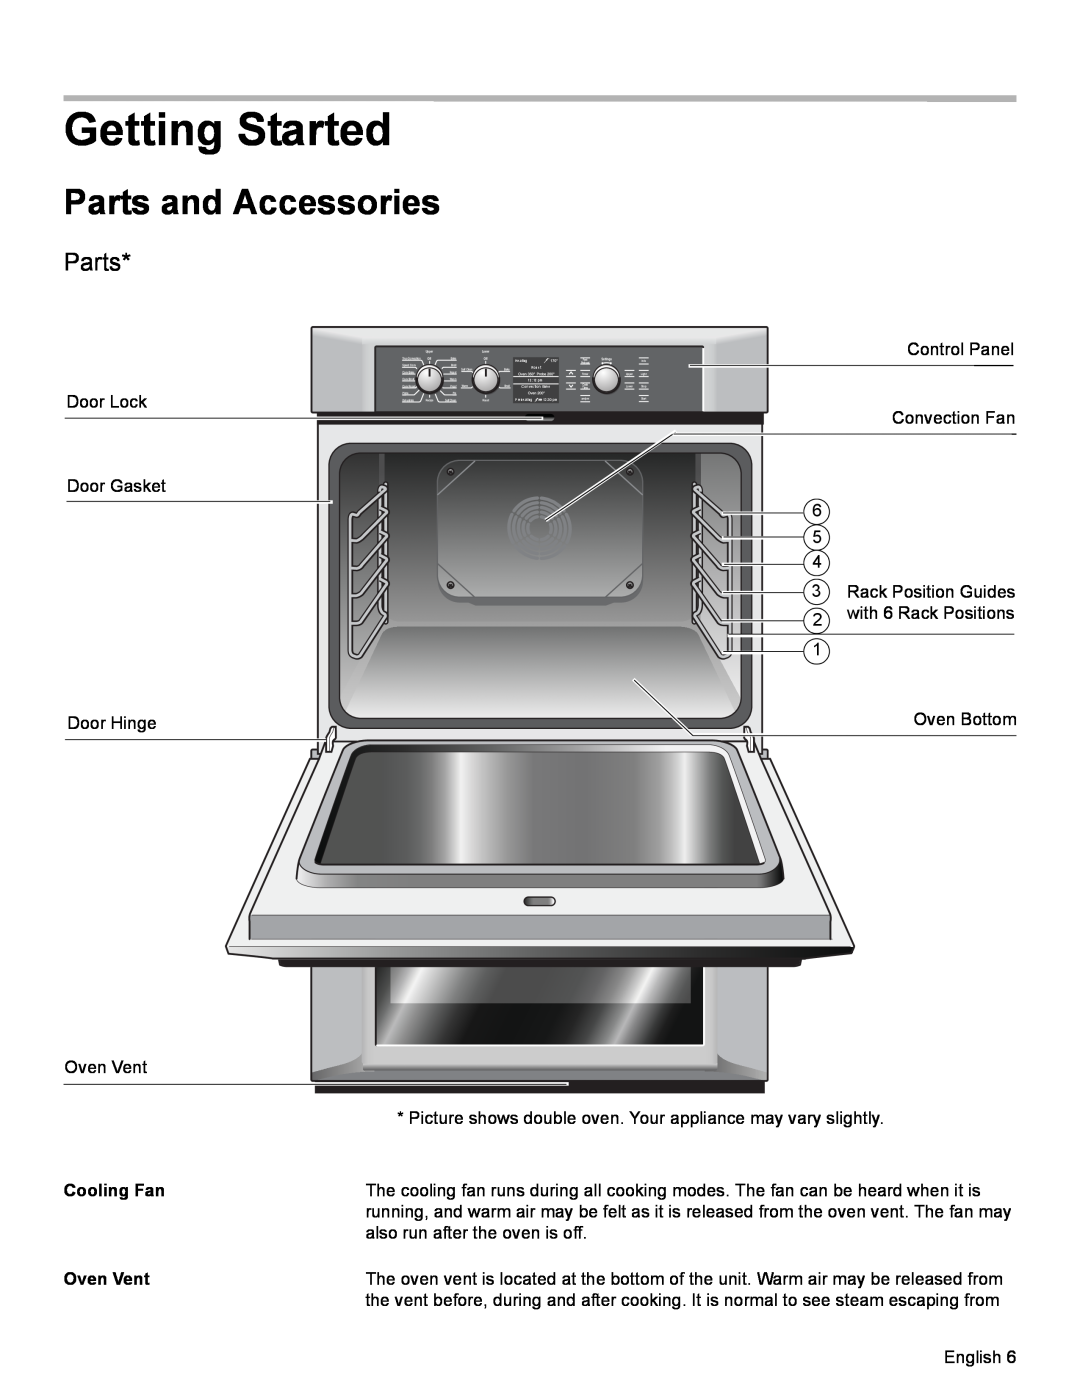 Bosch Appliances HBN54, HBL57, HBL56, HBL54, HBN56 manual Getting Started, Parts and Accessories, Cooling Fan, Oven Vent 